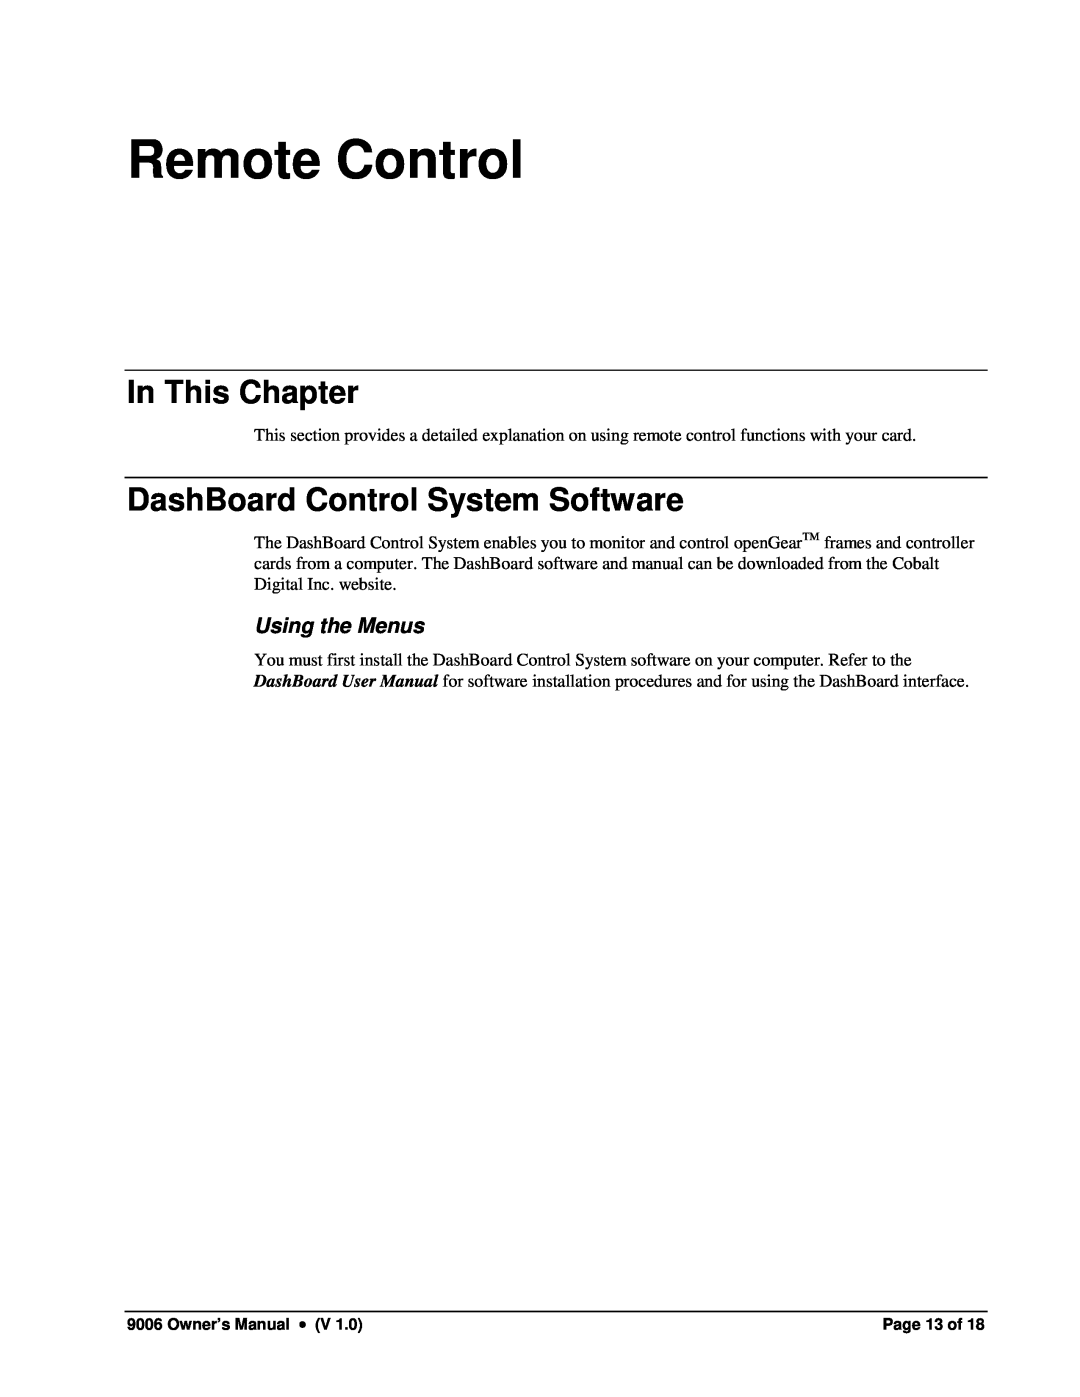 Cobalt Networks 9006 owner manual Remote Control, DashBoard Control System Software, Using the Menus, In This Chapter 